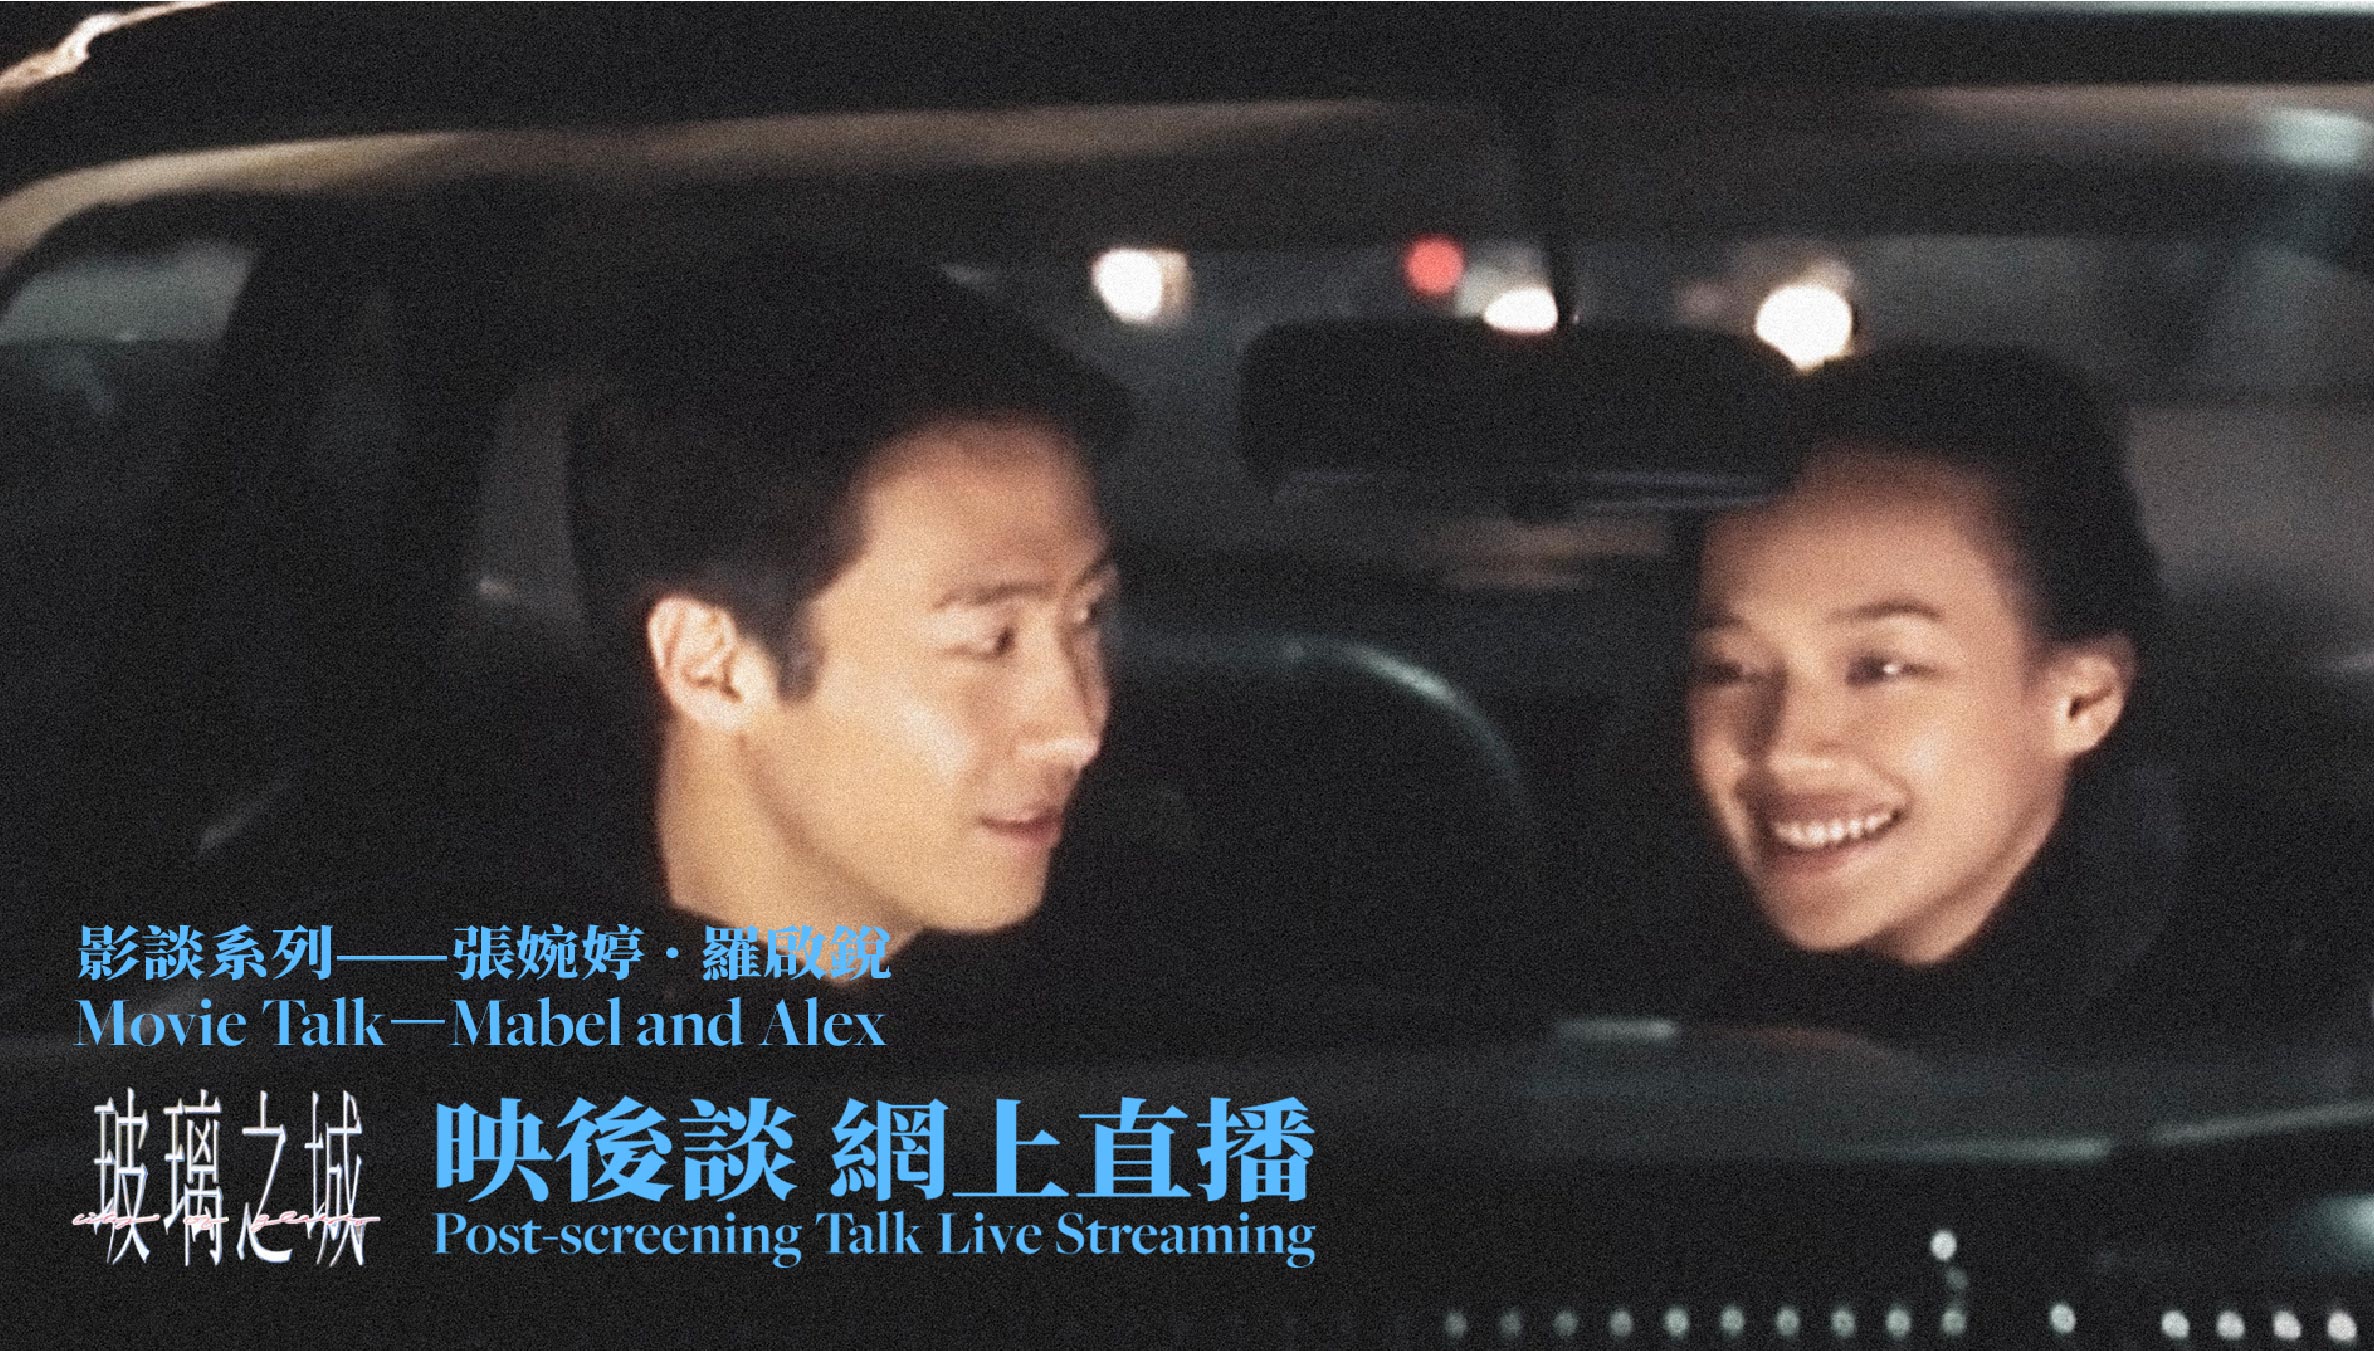 Movie Talk—Mabel and Alex<br>City of Glass Post-screening Talk<br>Live Streaming